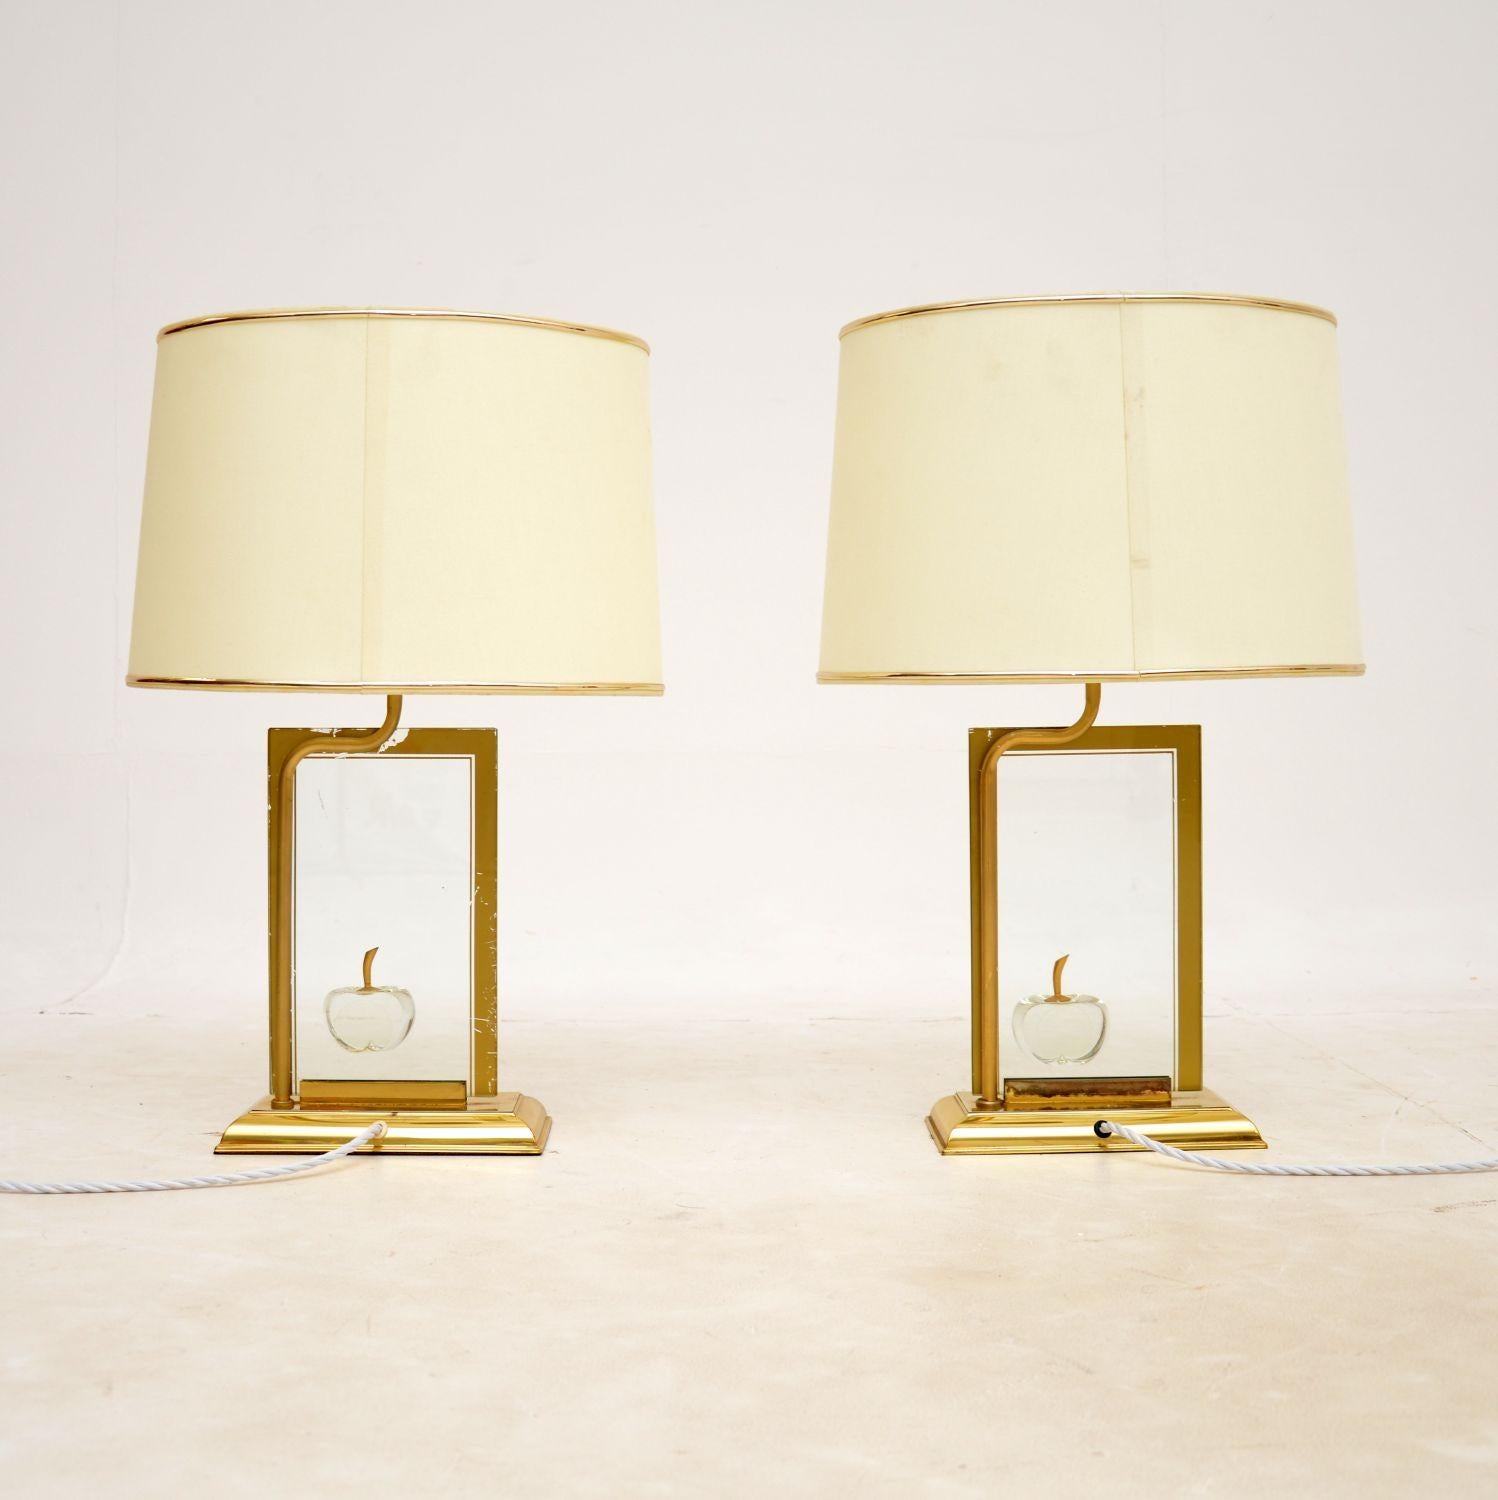 A beautiful pair of vintage French table lamps in brass and glass. They were recently imported from France, they were made in the 1970’s by Le Dauphin.

The design is gorgeous, each is made from a sheet of thick decorated glass that sits on a brass